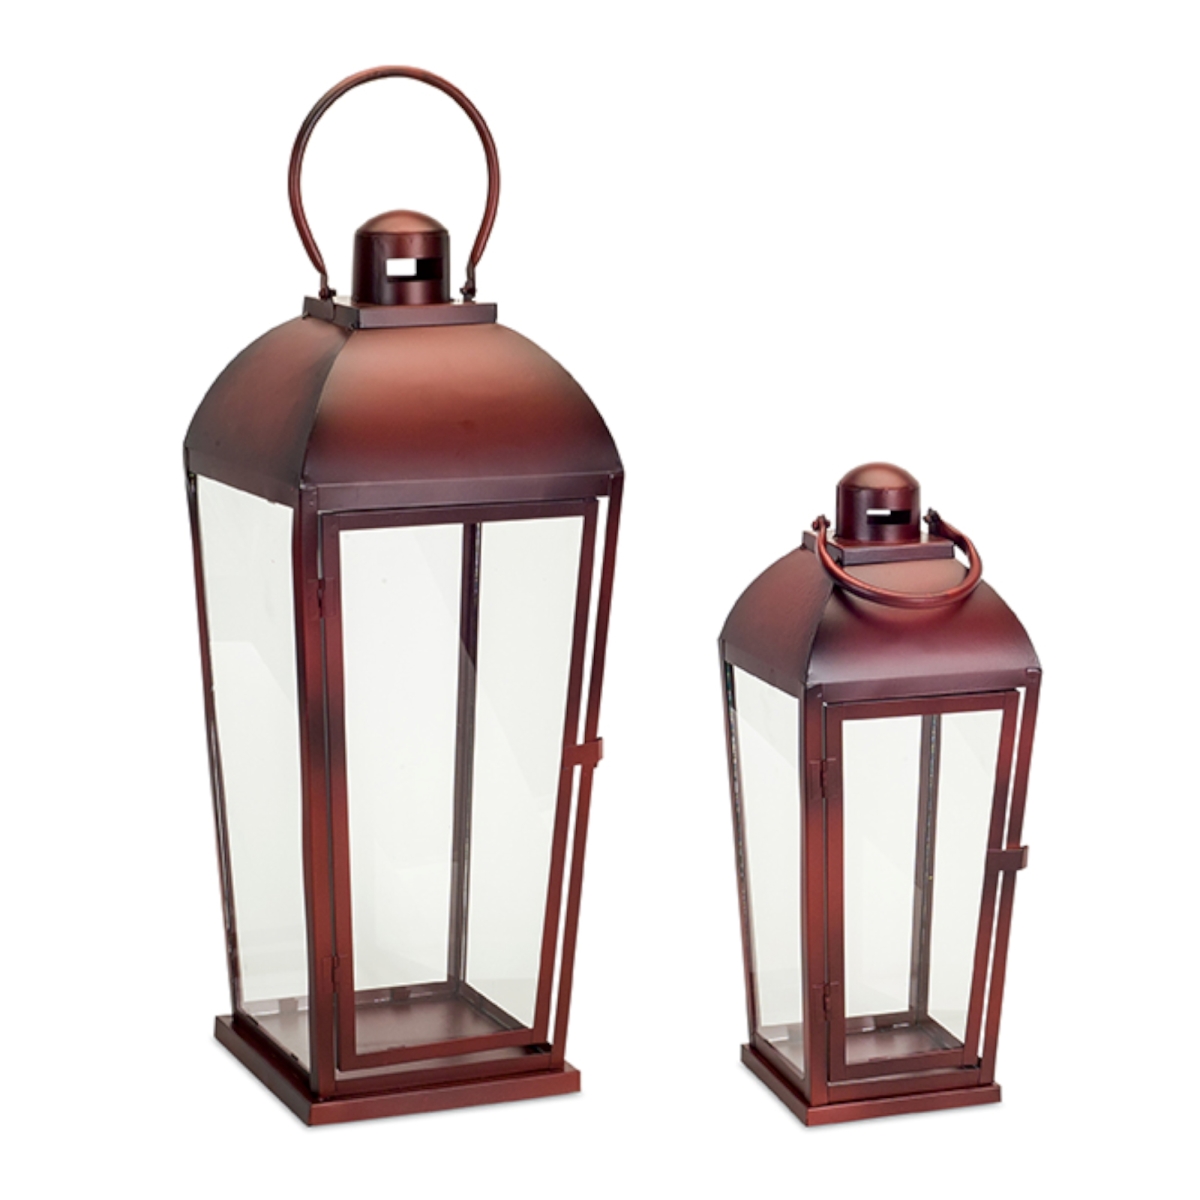 73619ds 17 X 23.5 In. Metal & Glass Lantern, Red - Set Of 2